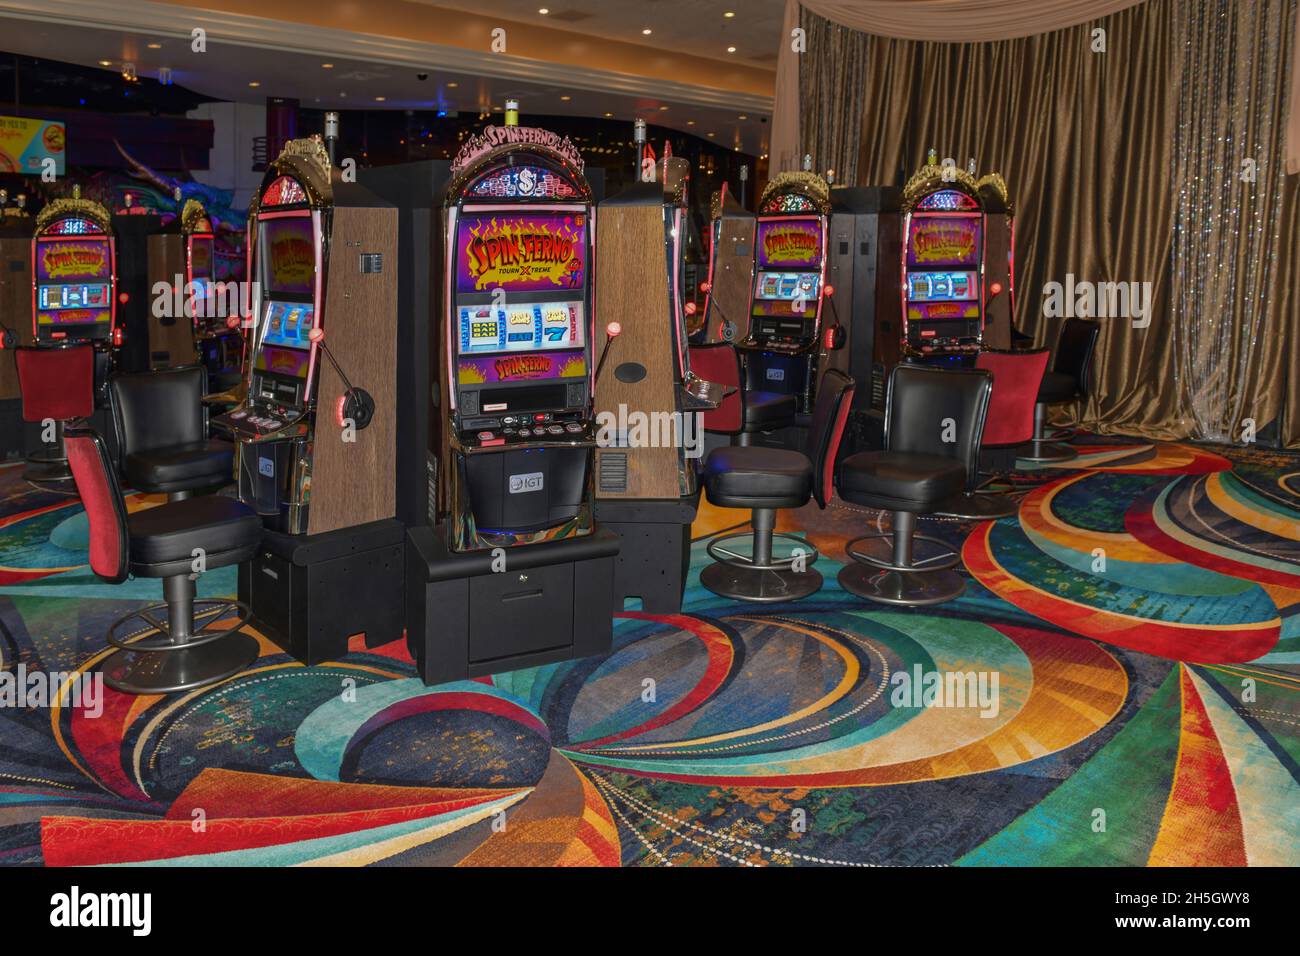 Nevada USA September 5, 2021 The old slot machines are still used in the gaming area of the MGM Grand Las Vegas hotel casino Stock Photo